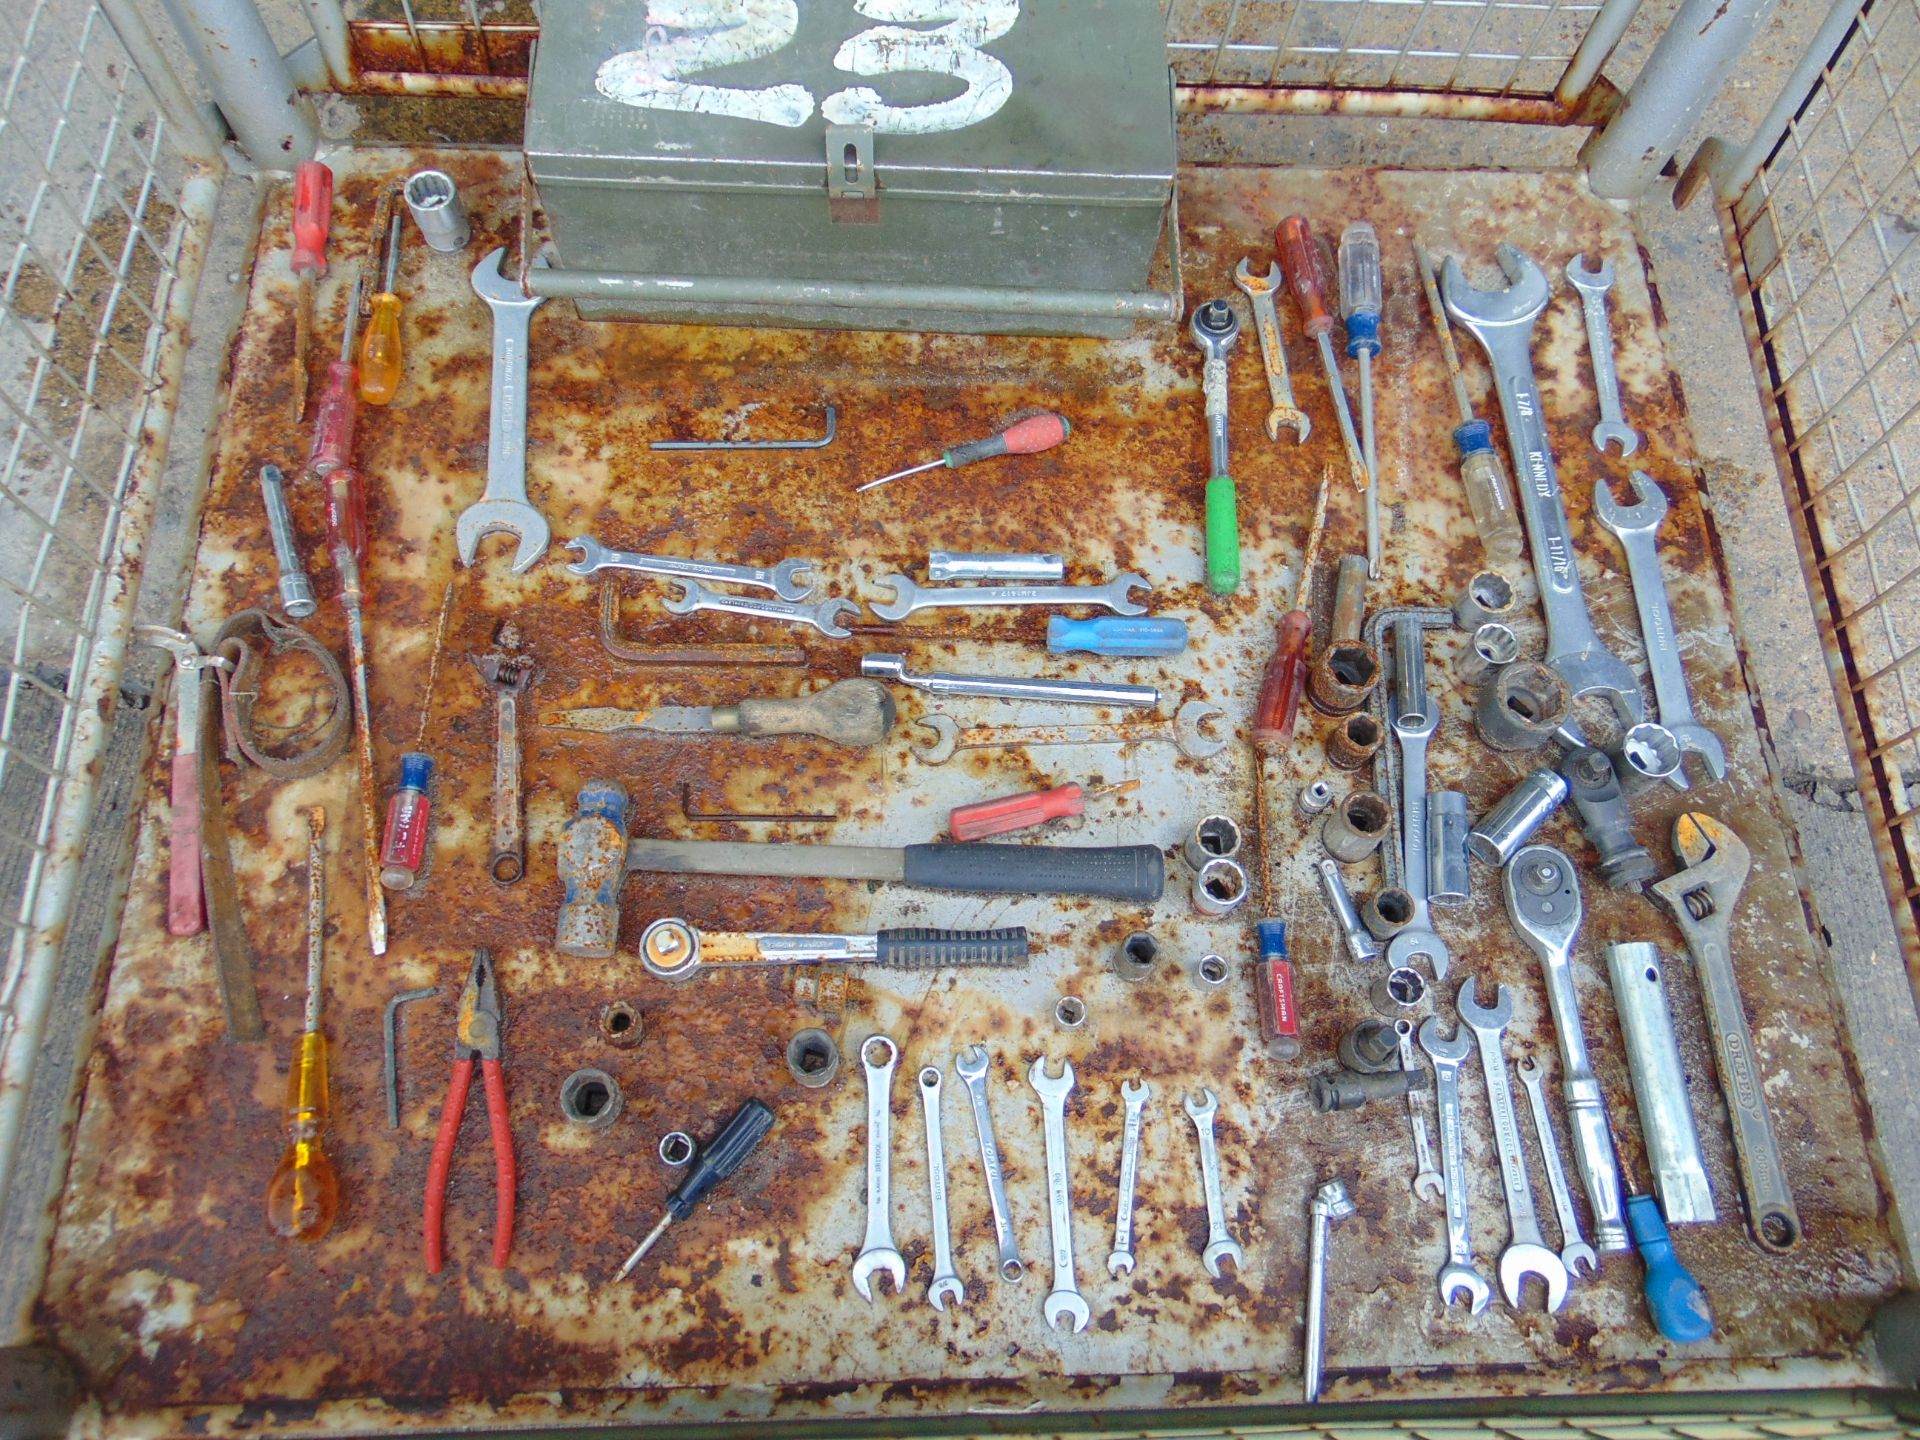 Tool Box and Tools as Shown